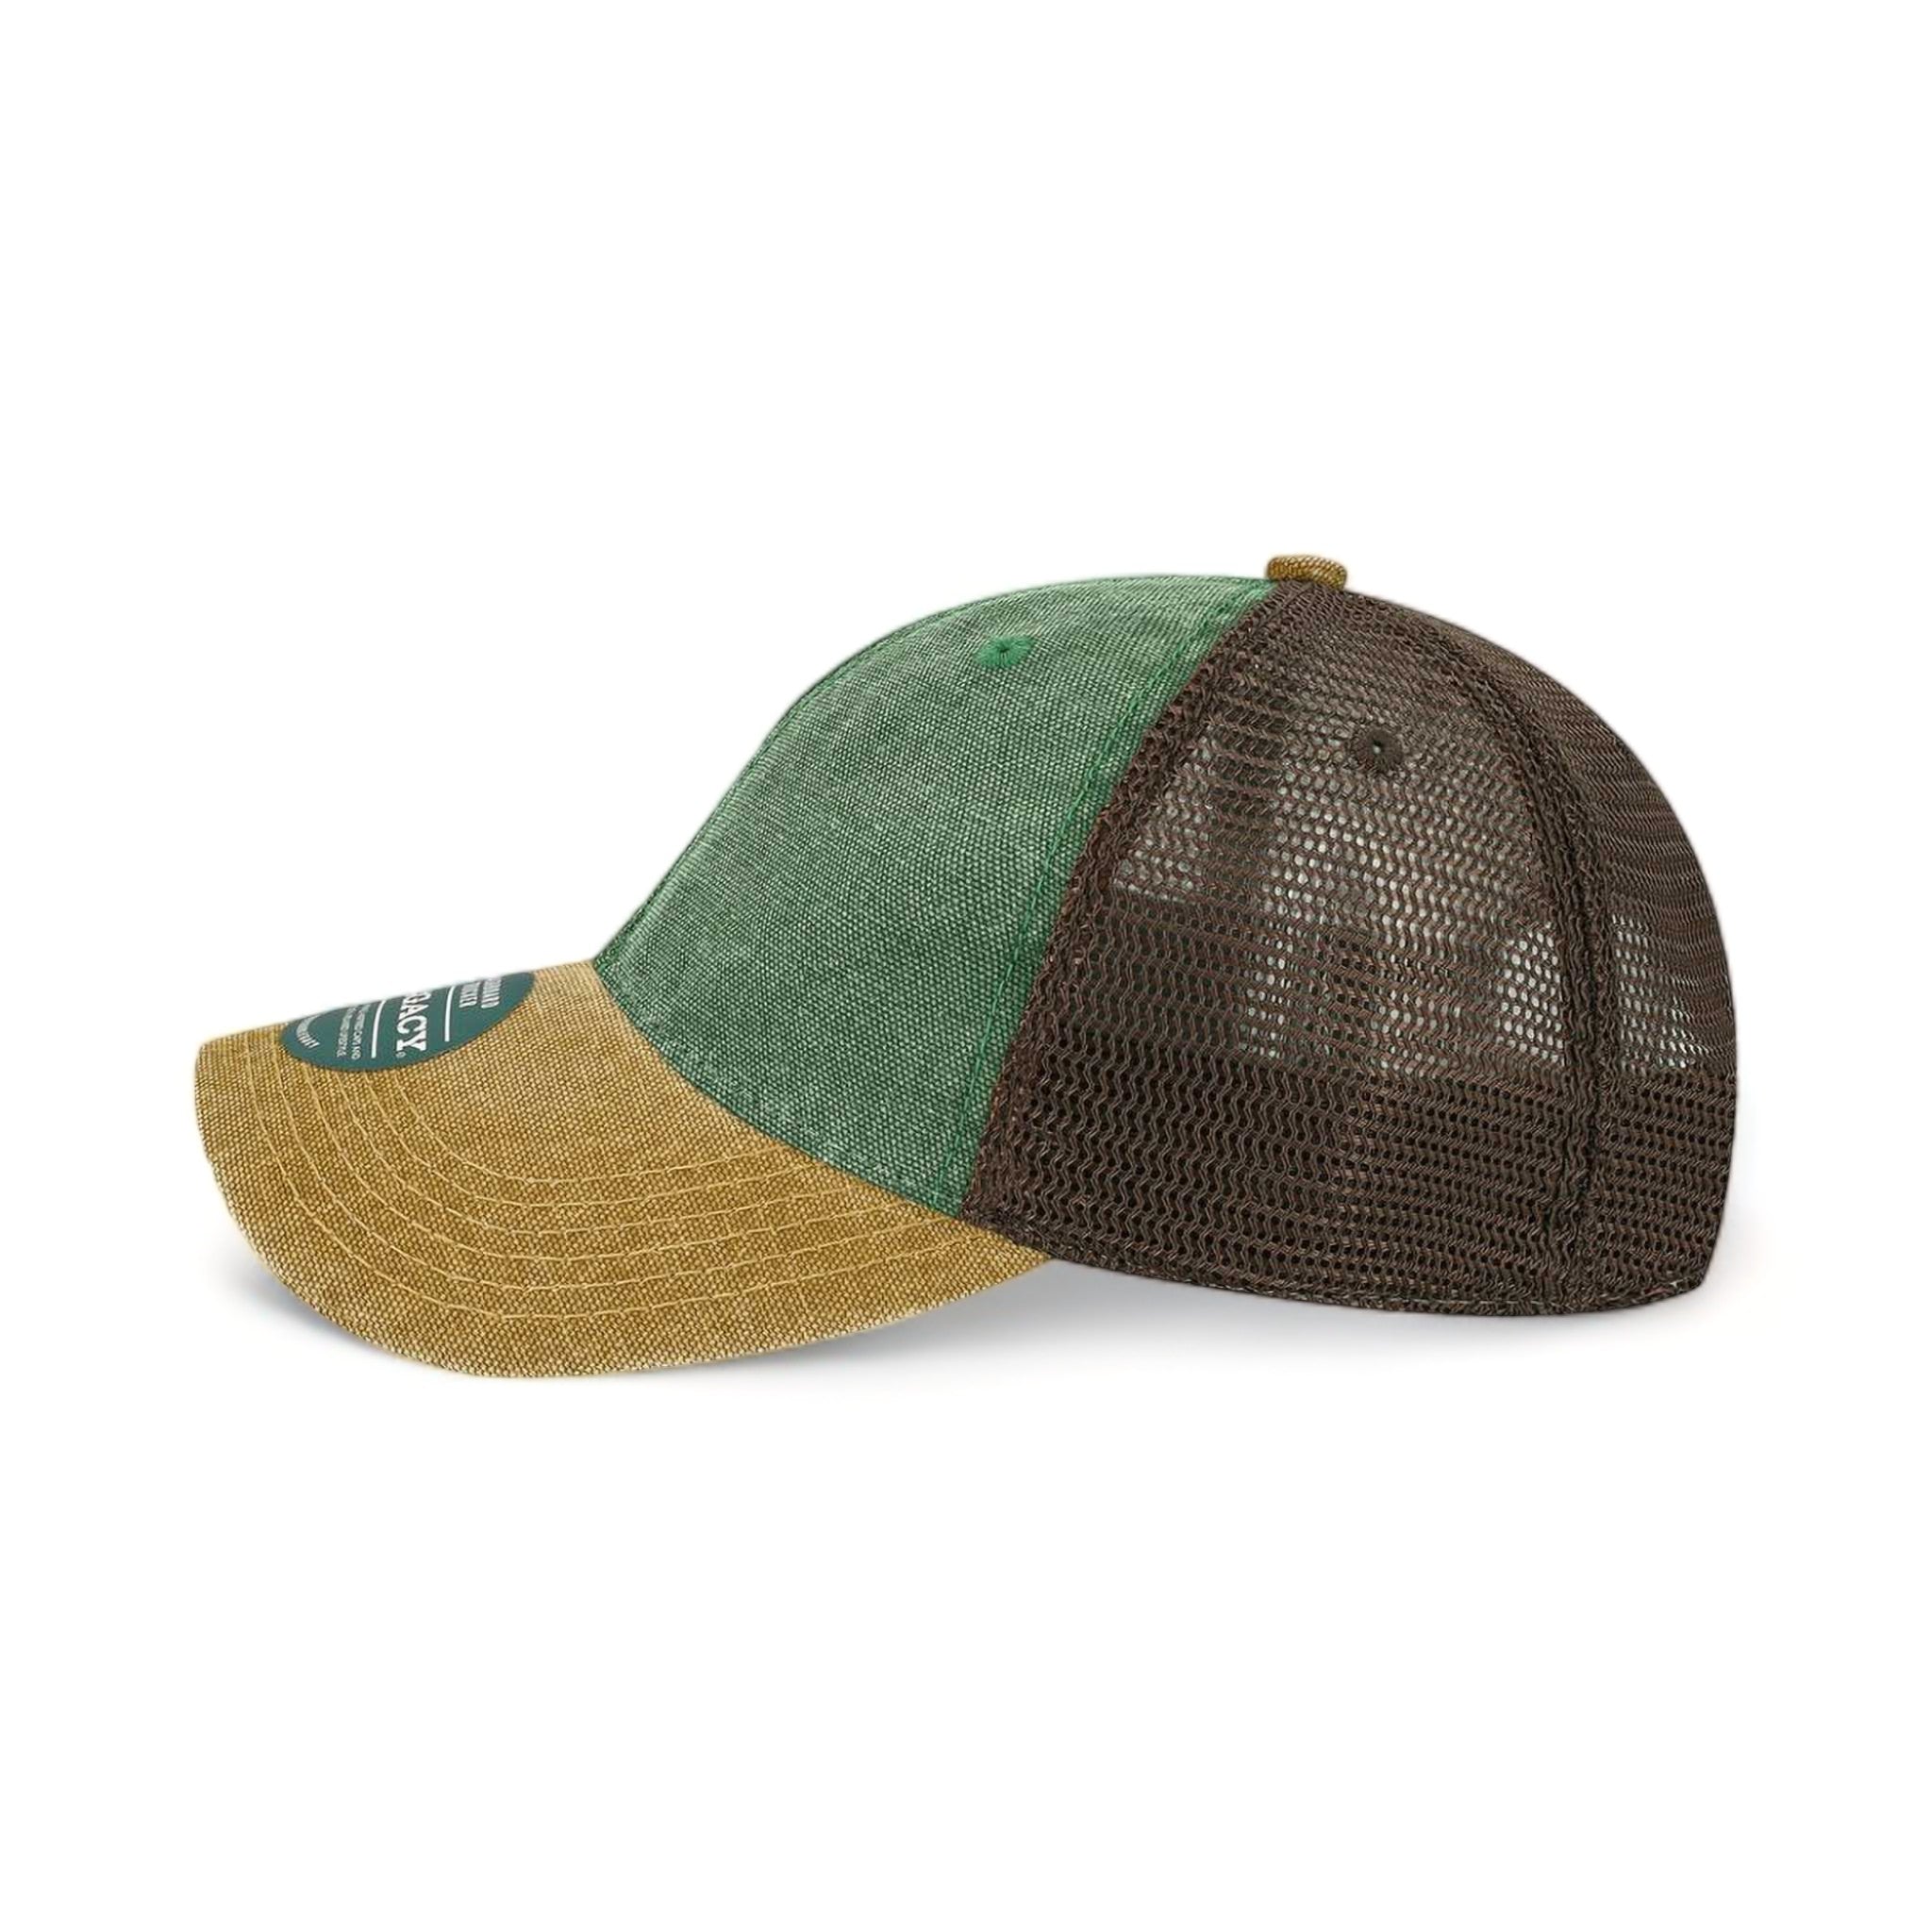 Side view of LEGACY DTA custom hat in green, camel and brown